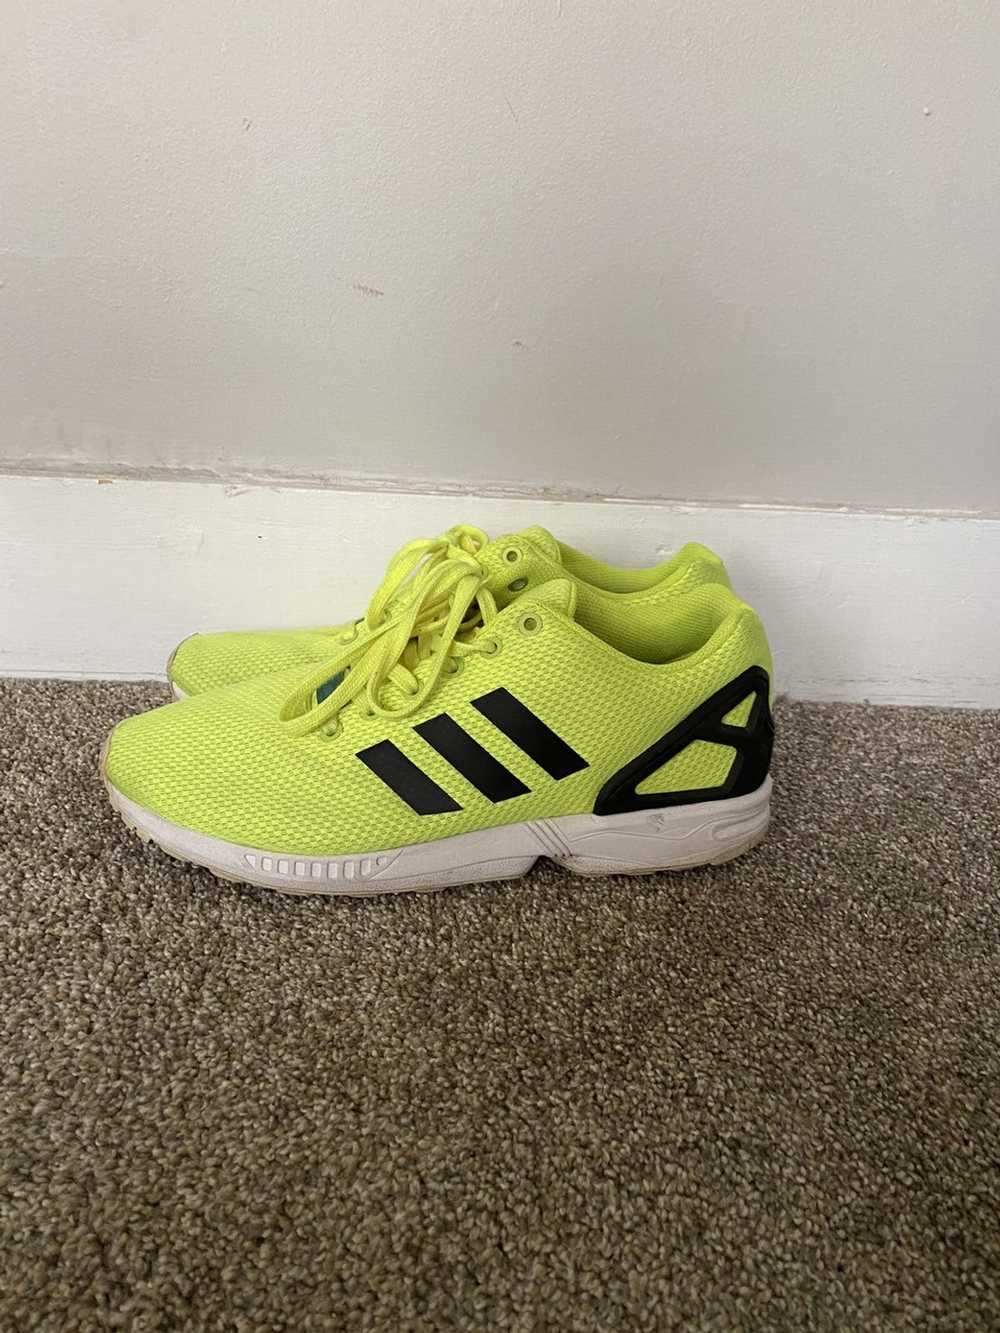 Adidas Size 10 - adidas ZX Flux Green - image 1